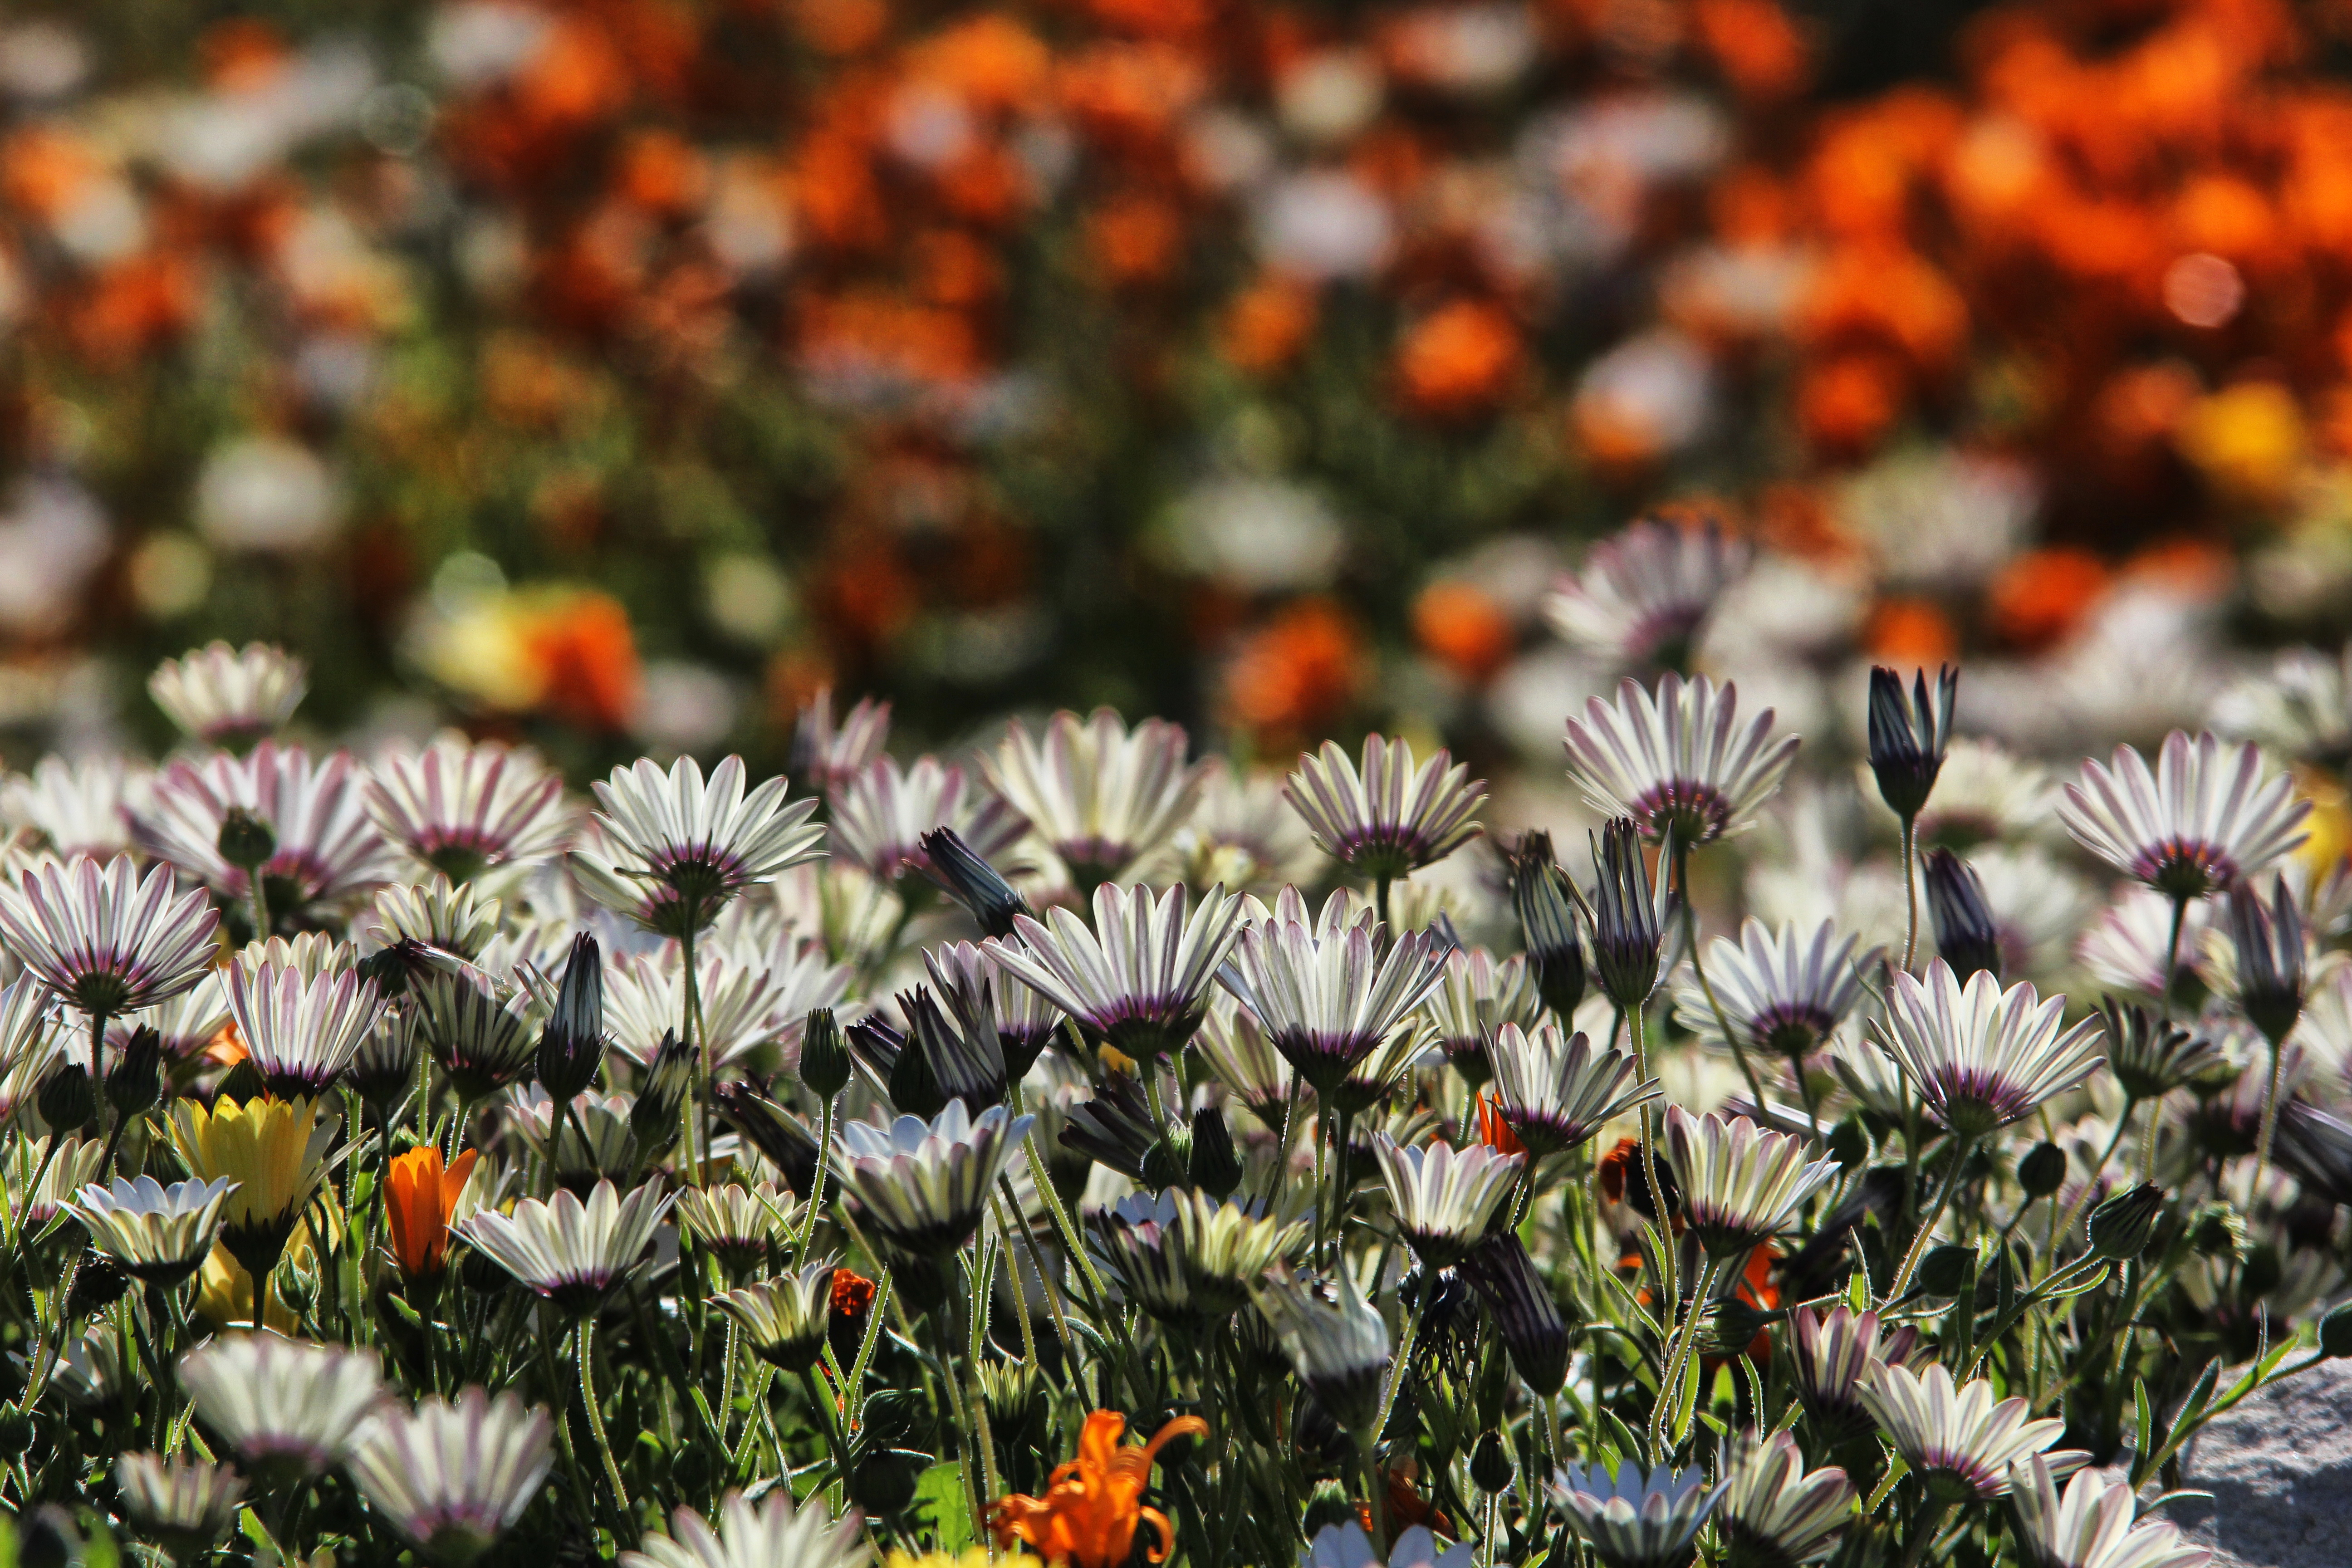 Springtime flower beds are to be found all the way from Williston to the West Coast. Image: Chris Marais